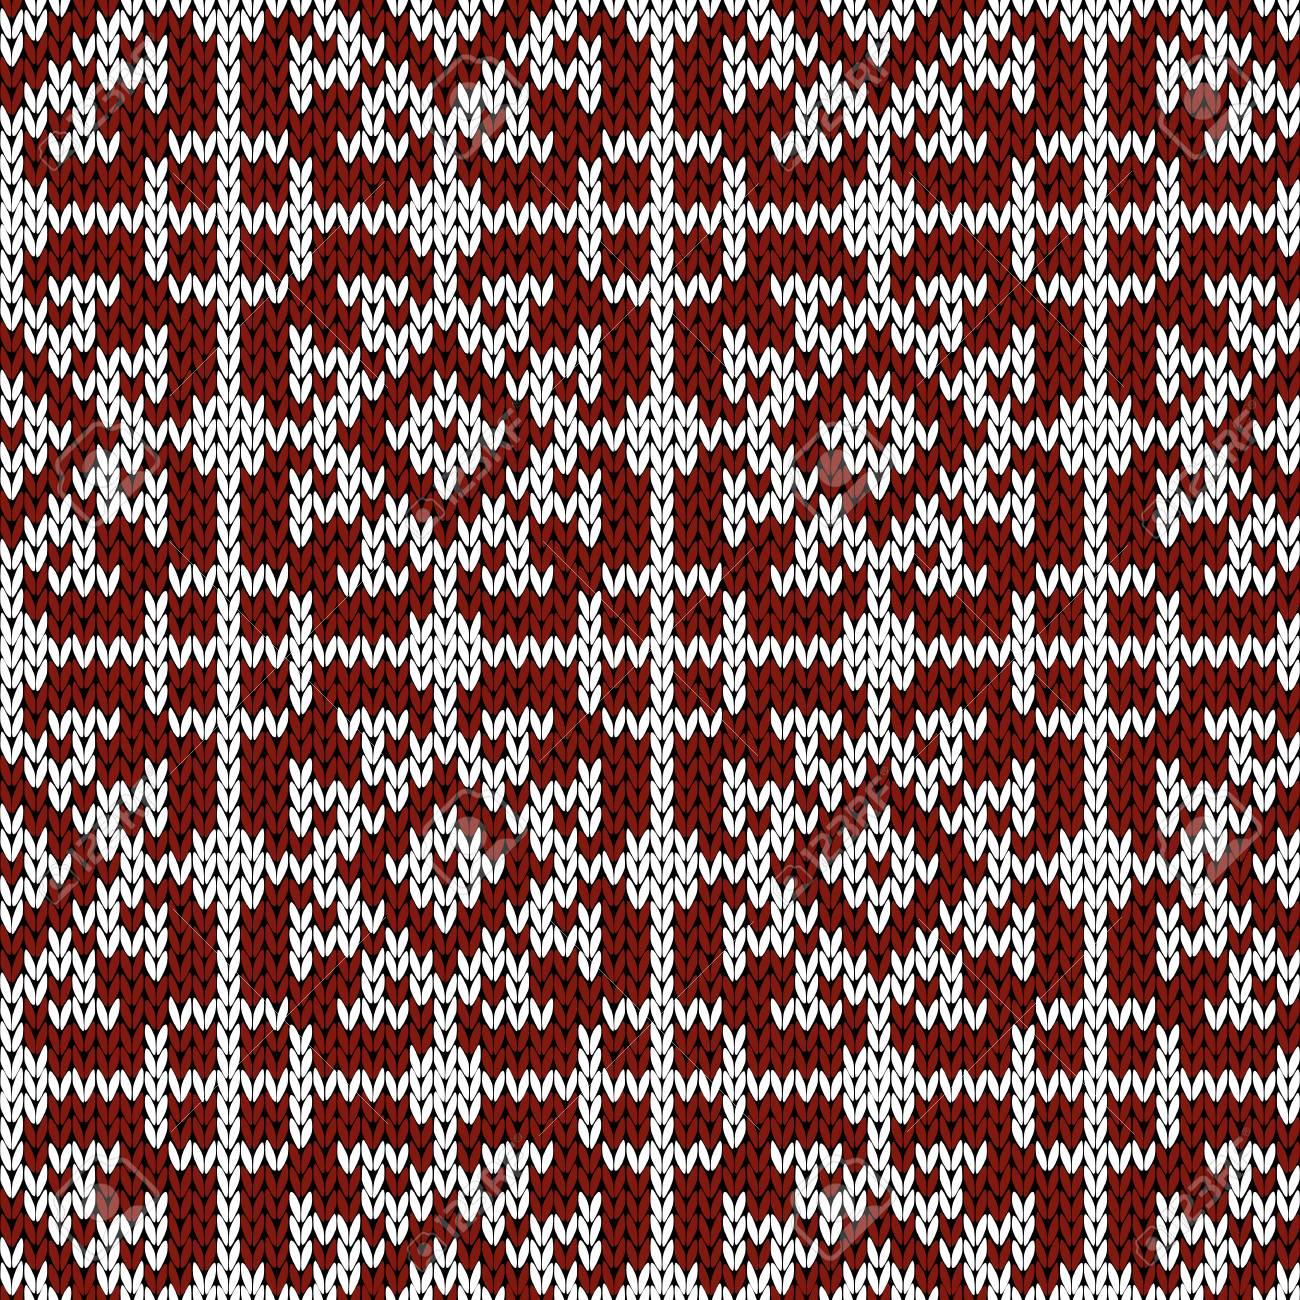 Orient Ethnic Knitting Motley Background In White And Dark Red